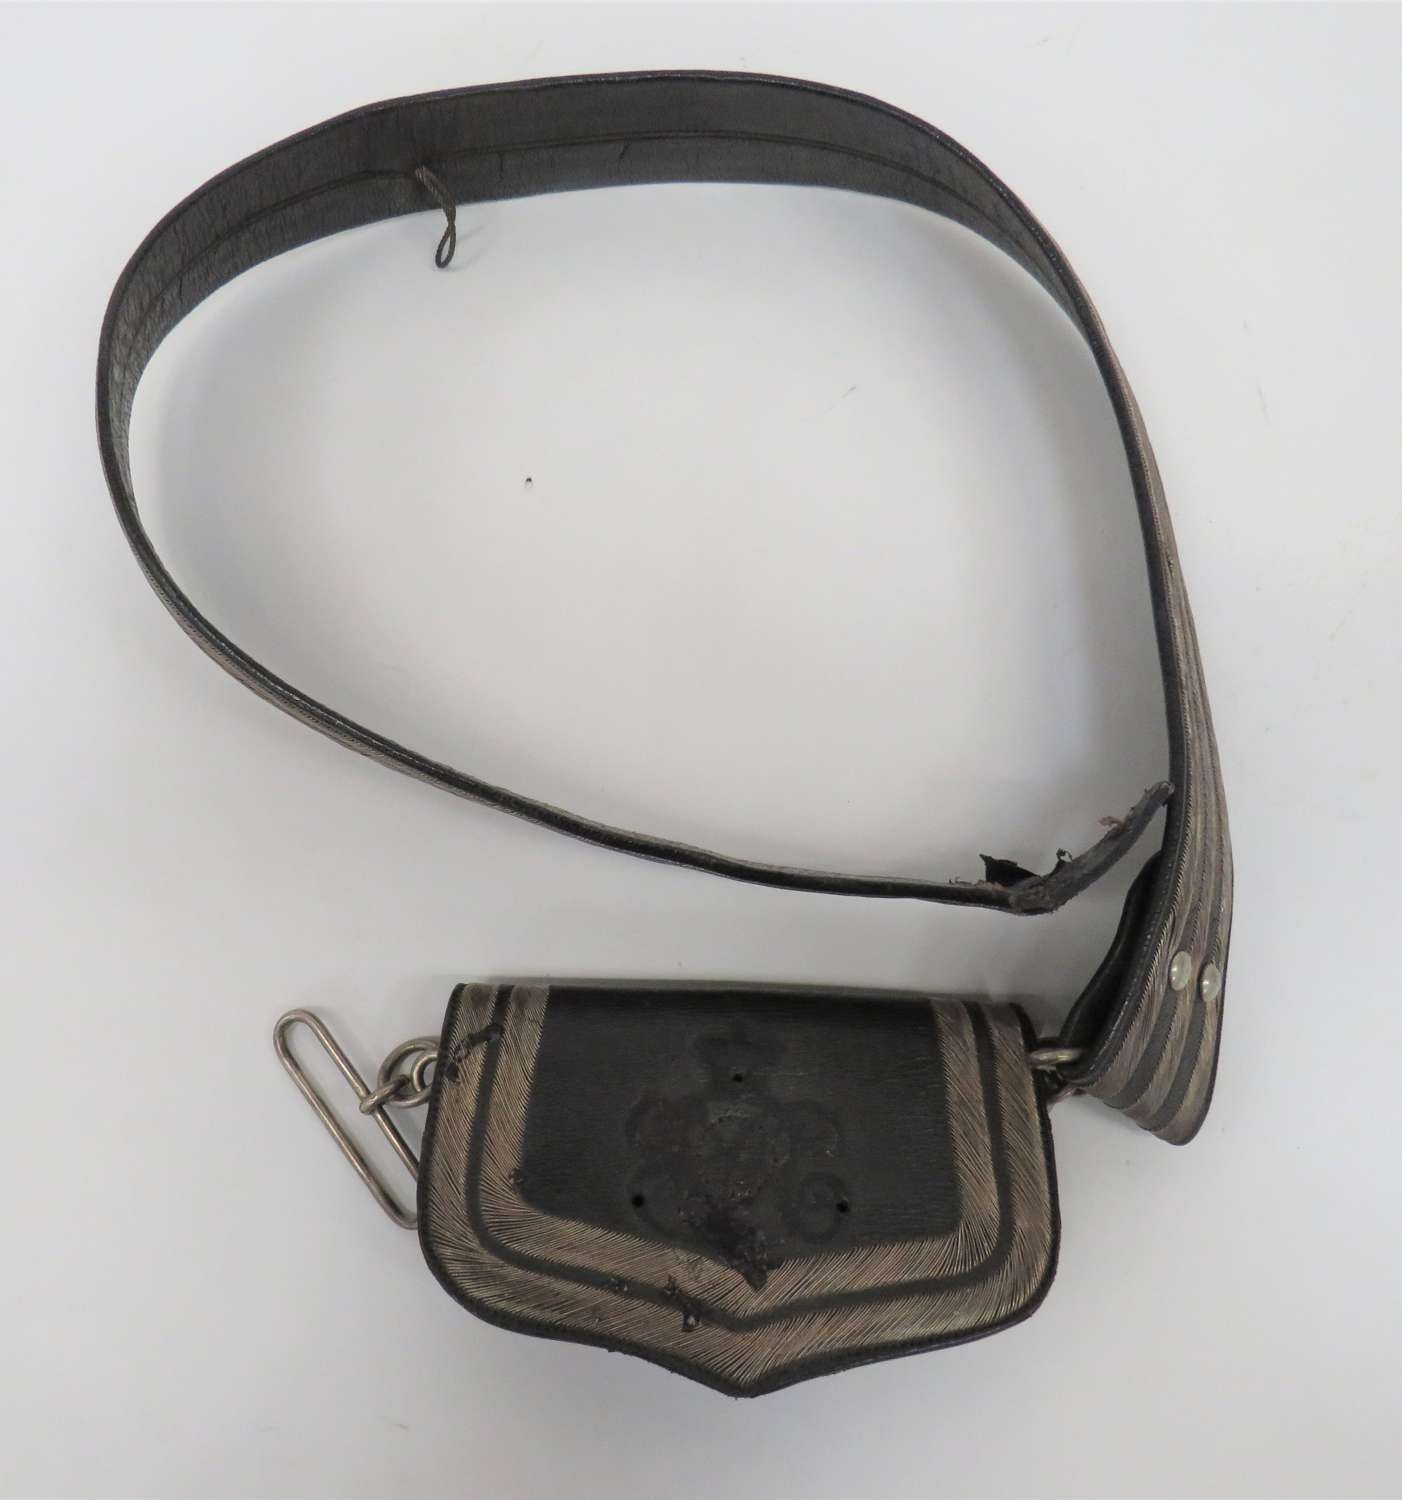 Victorian Volunteer Medical Corps Shoulder Pouch and Strap